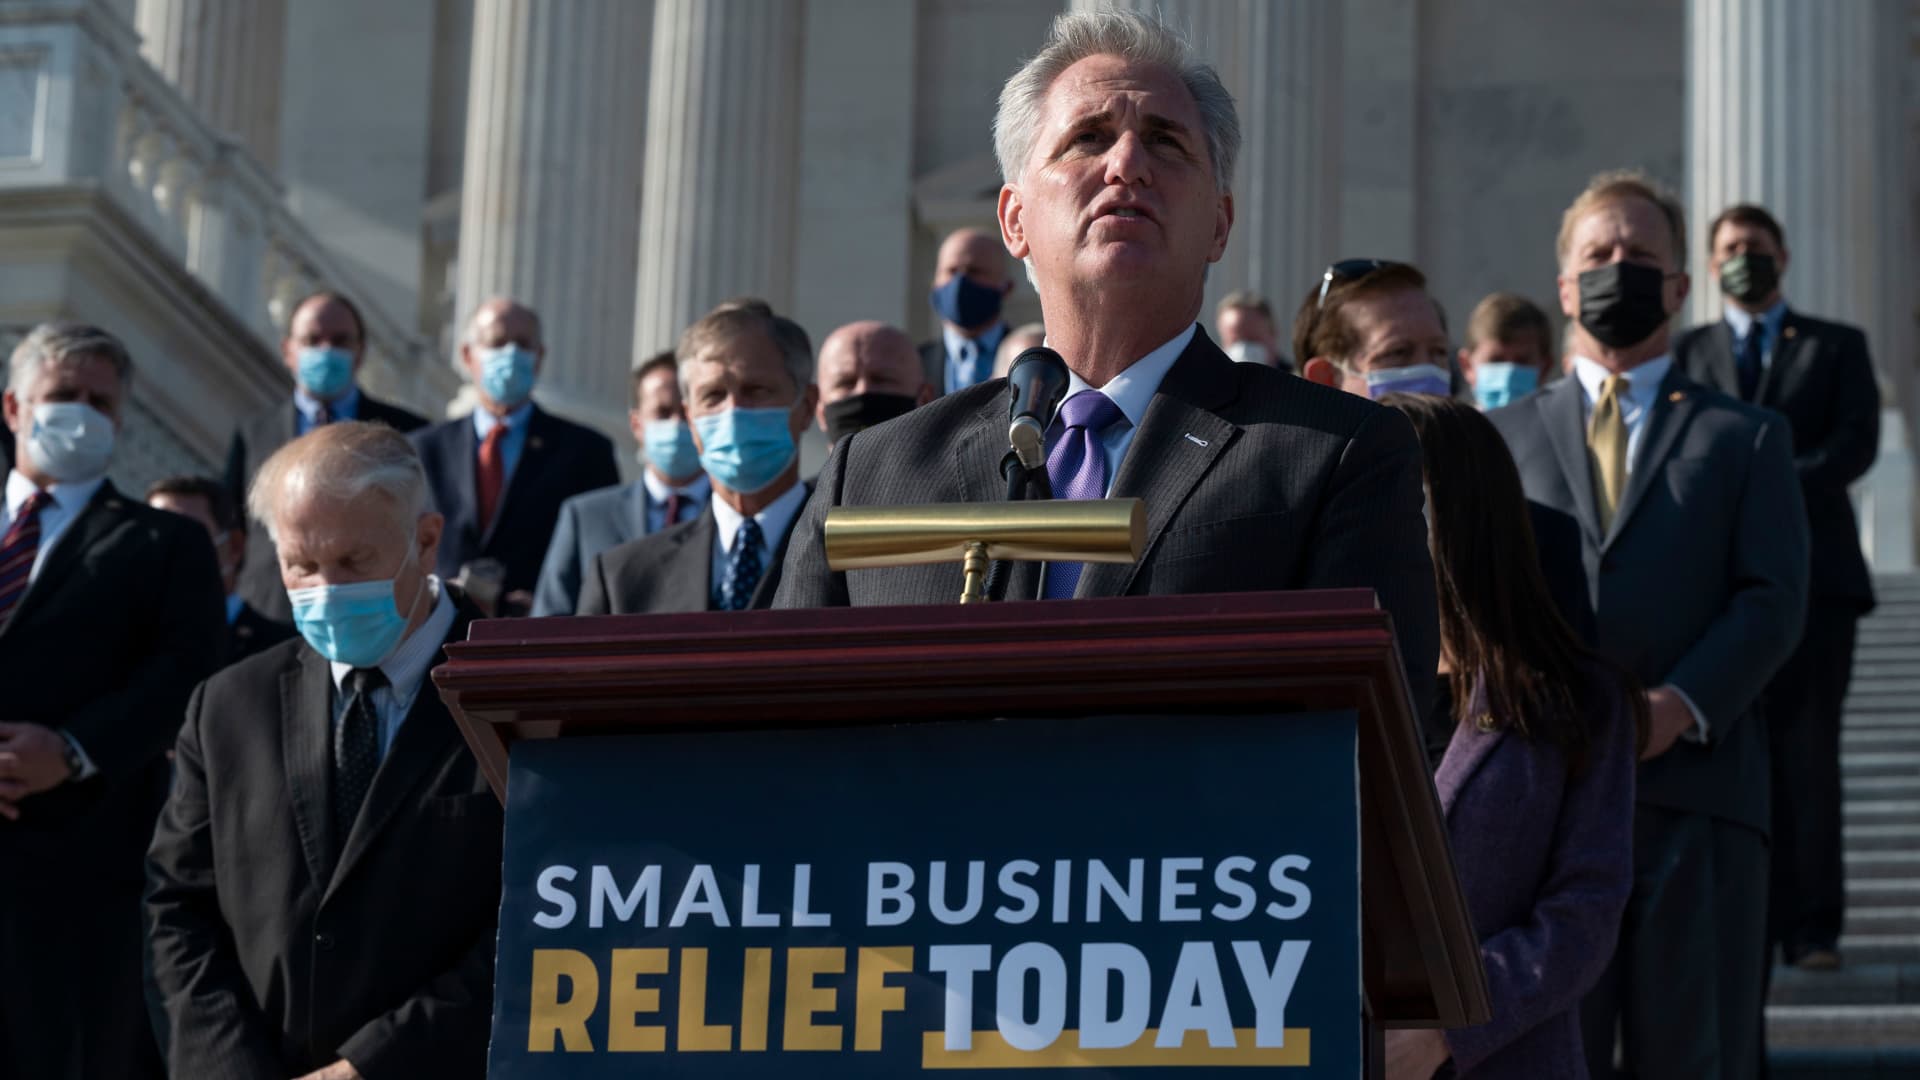 House Minority Leader Kevin McCarthy, Republican of California, speaks during a press conference on small business relief during the Covid-19 pandemic, on the steps of the US Capitol in Washington, DC on December 10, 2020.